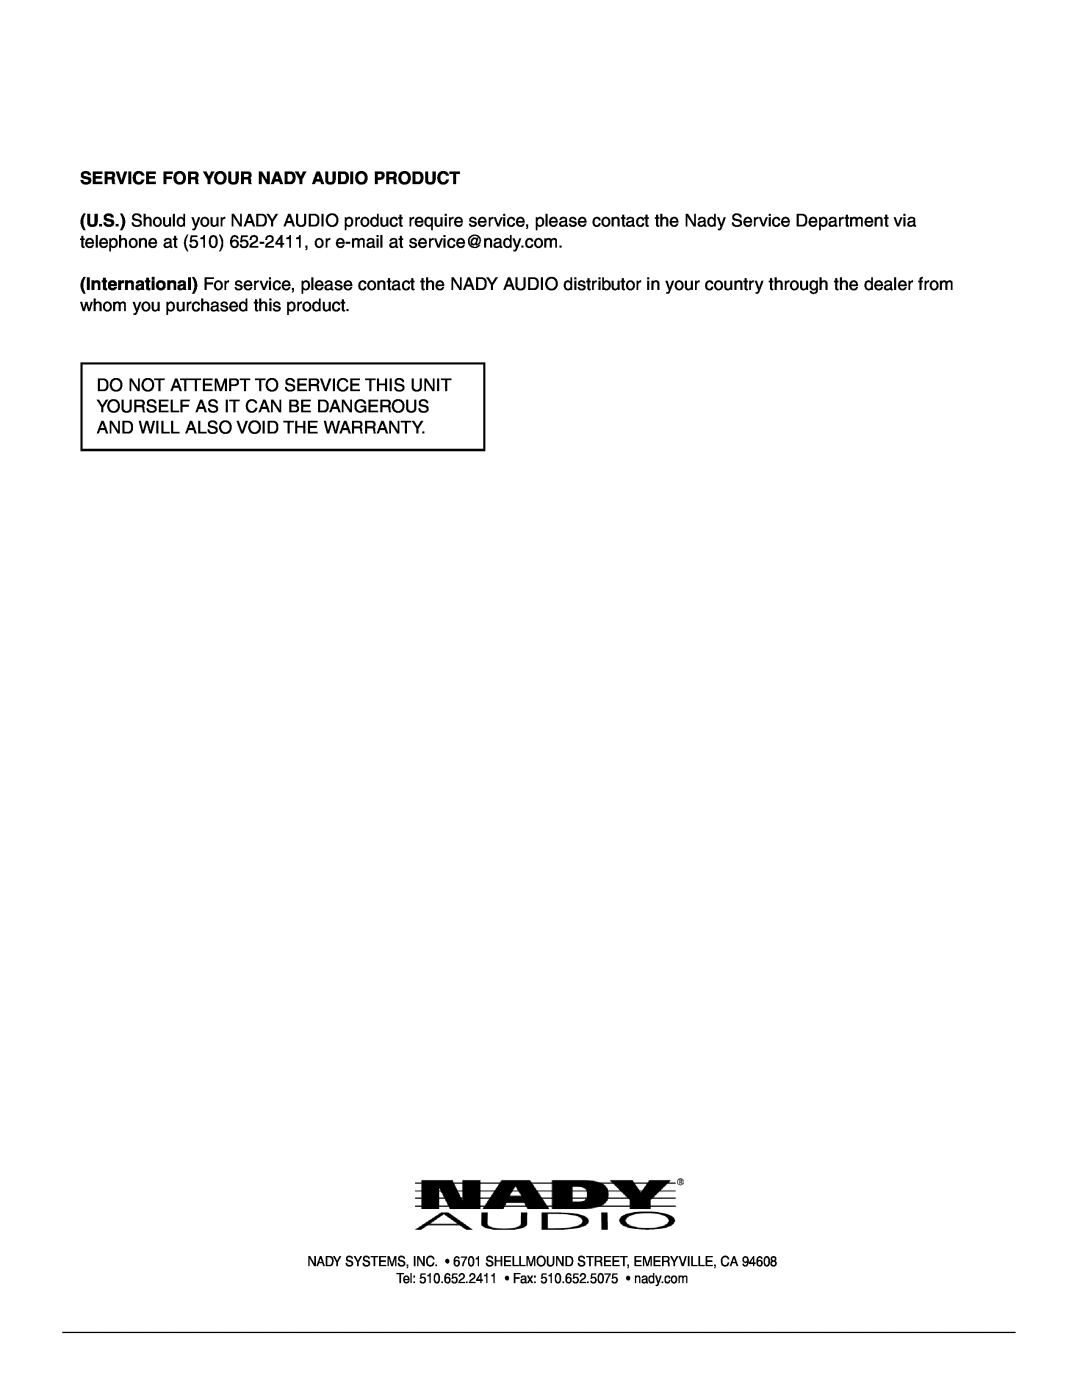 Nady Systems 3WA-1700 owner manual Service For Your Nady Audio Product 